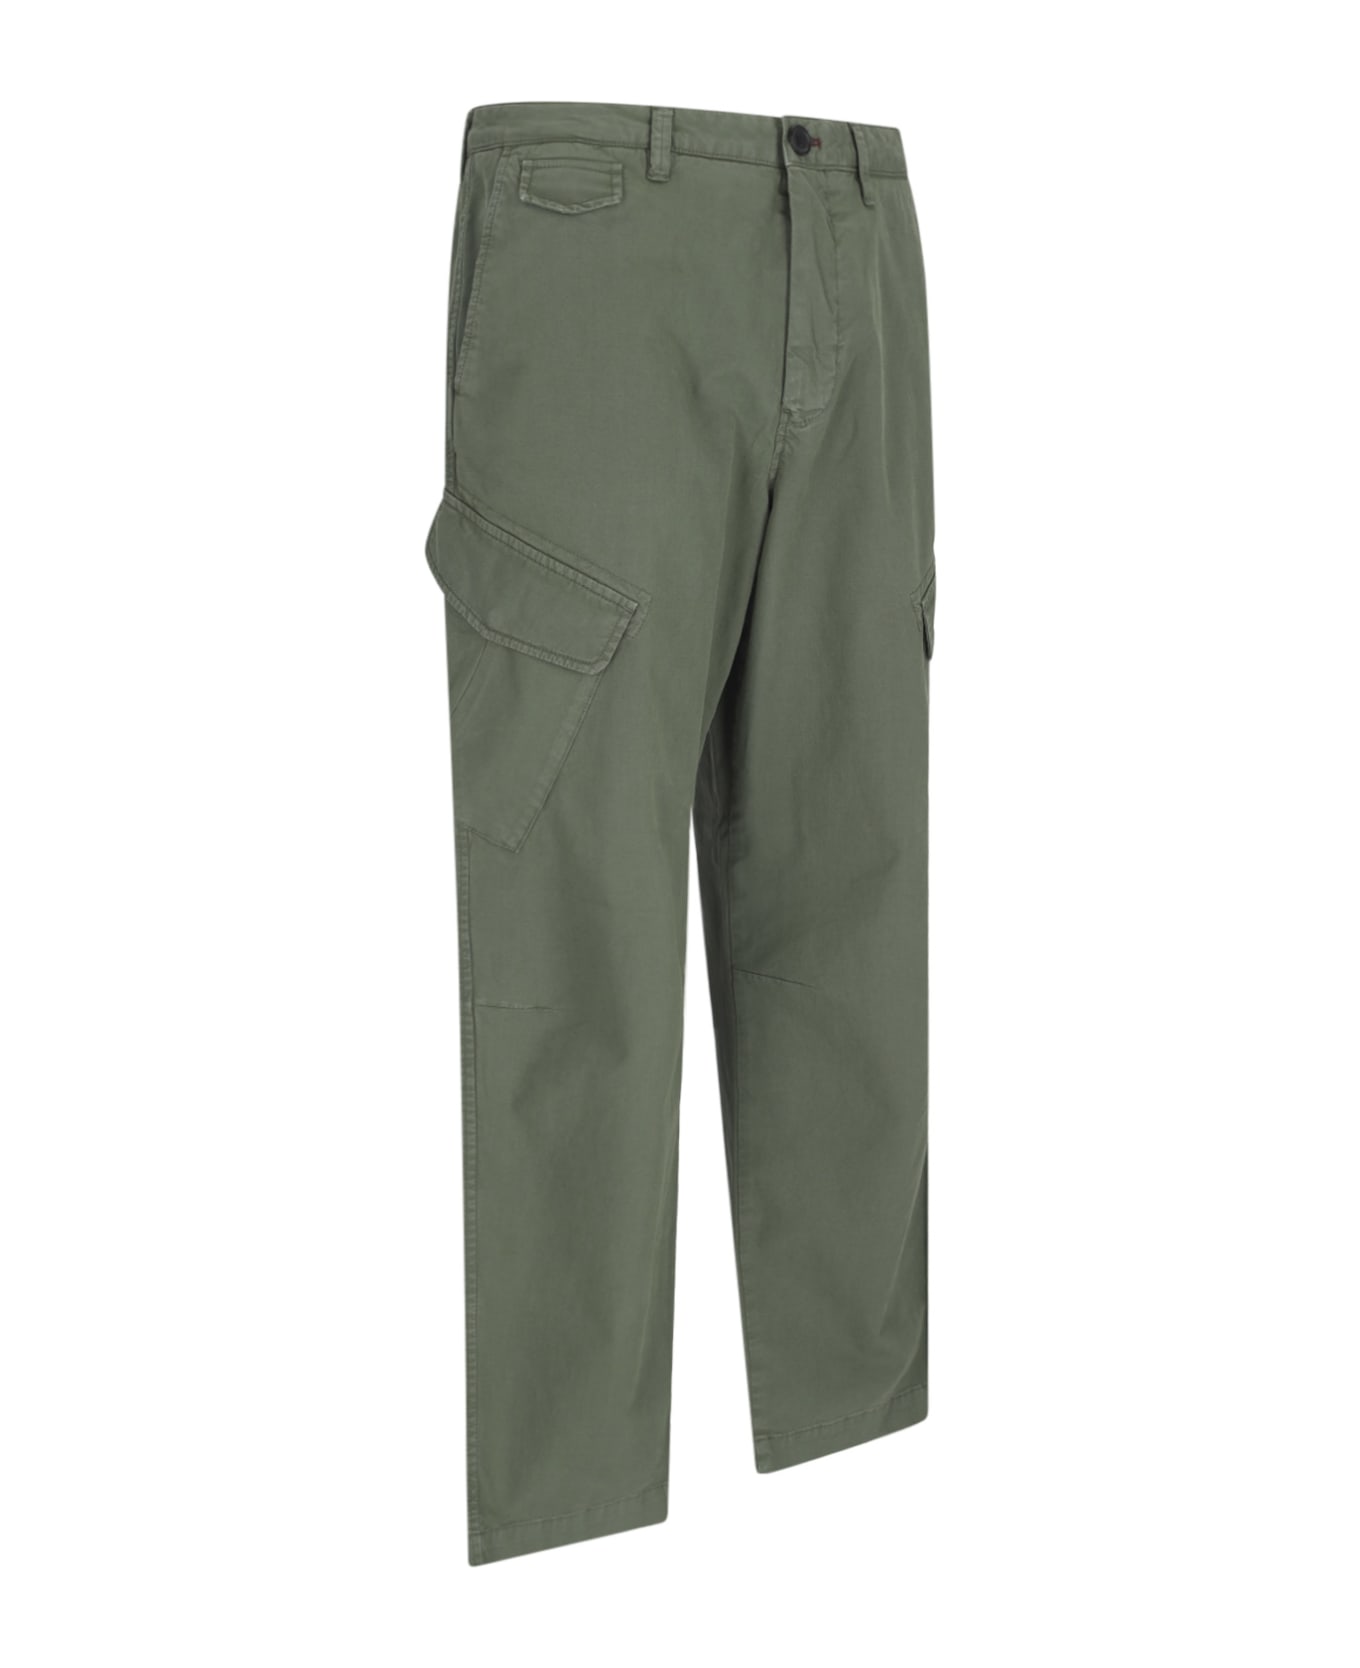 Paul Smith Cargo Trousers - Green ボトムス